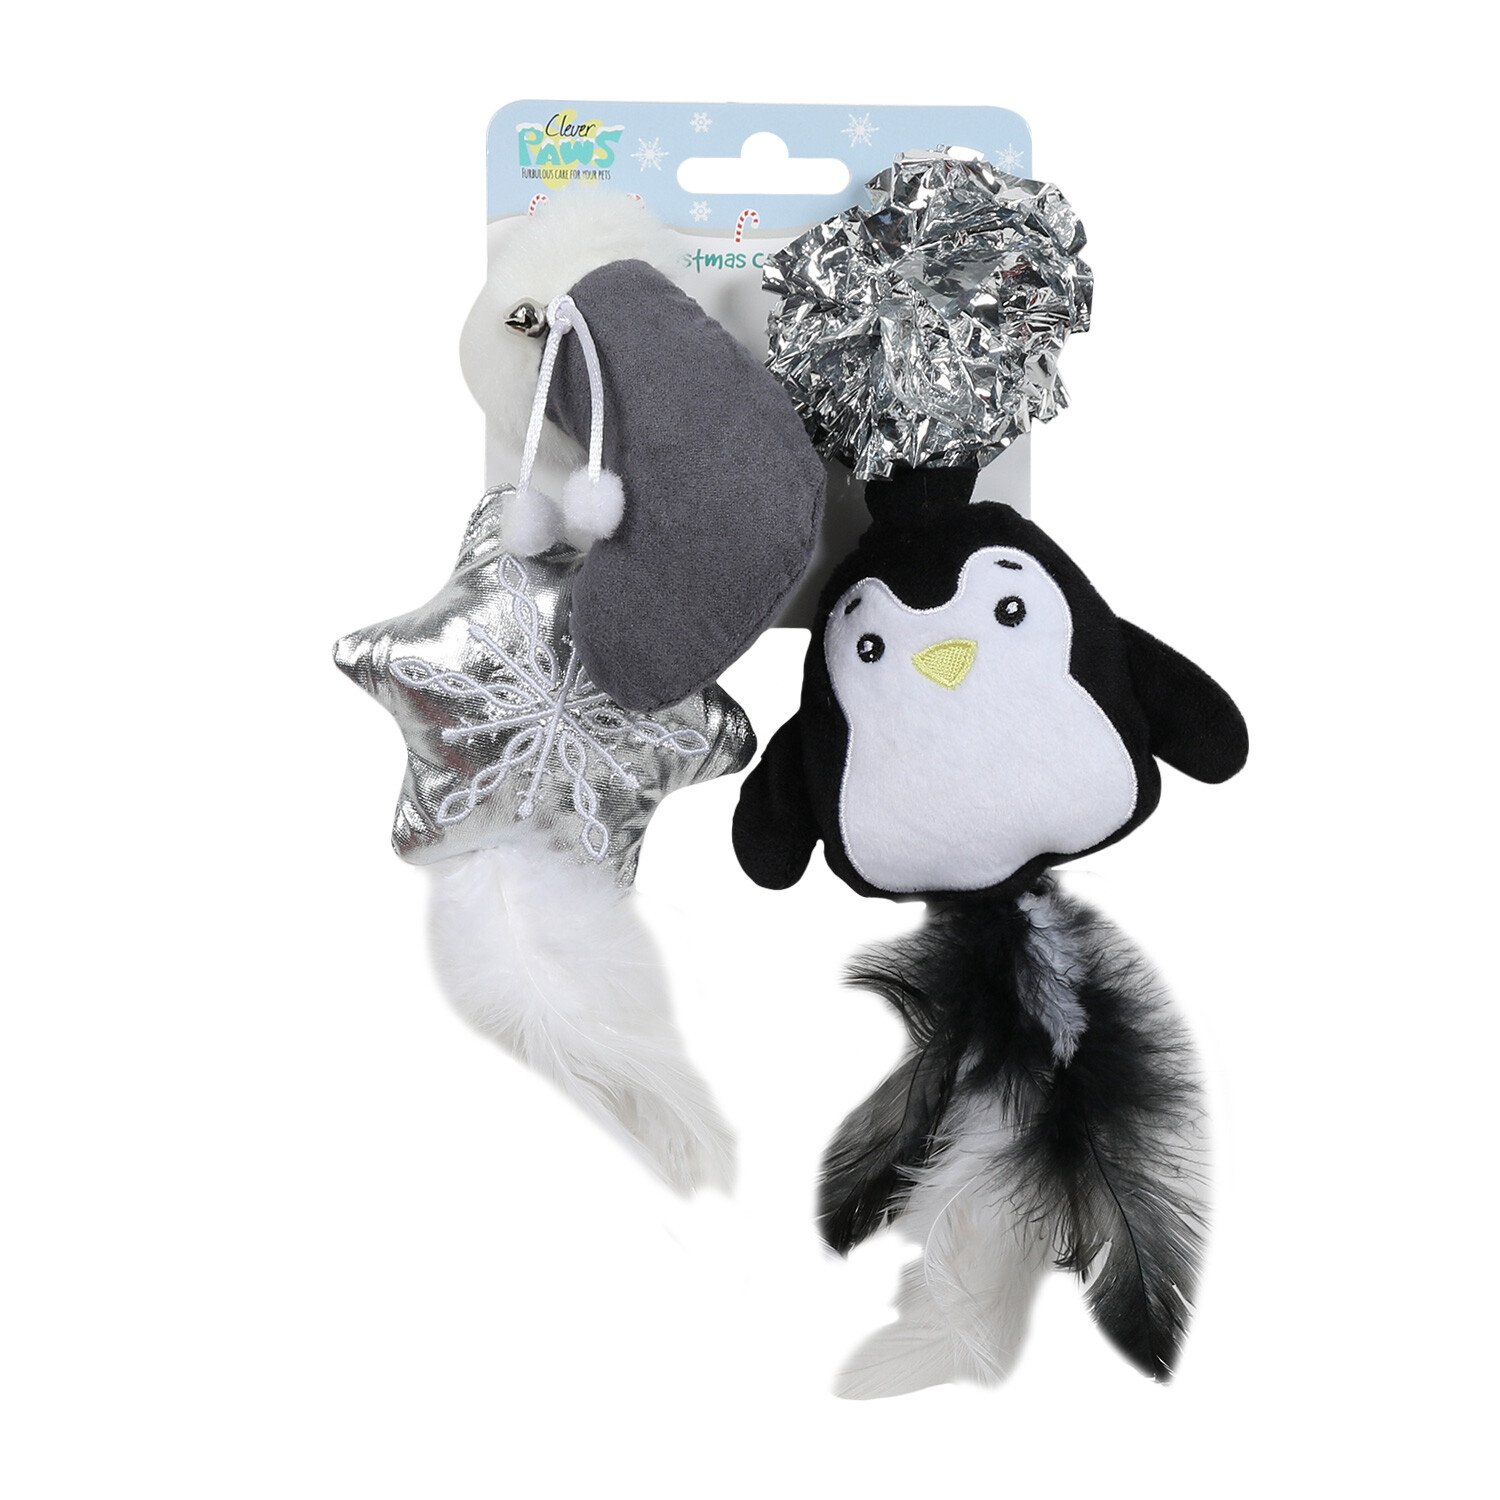 Clever Paws Christmas Cat Toys 4 Pack Image